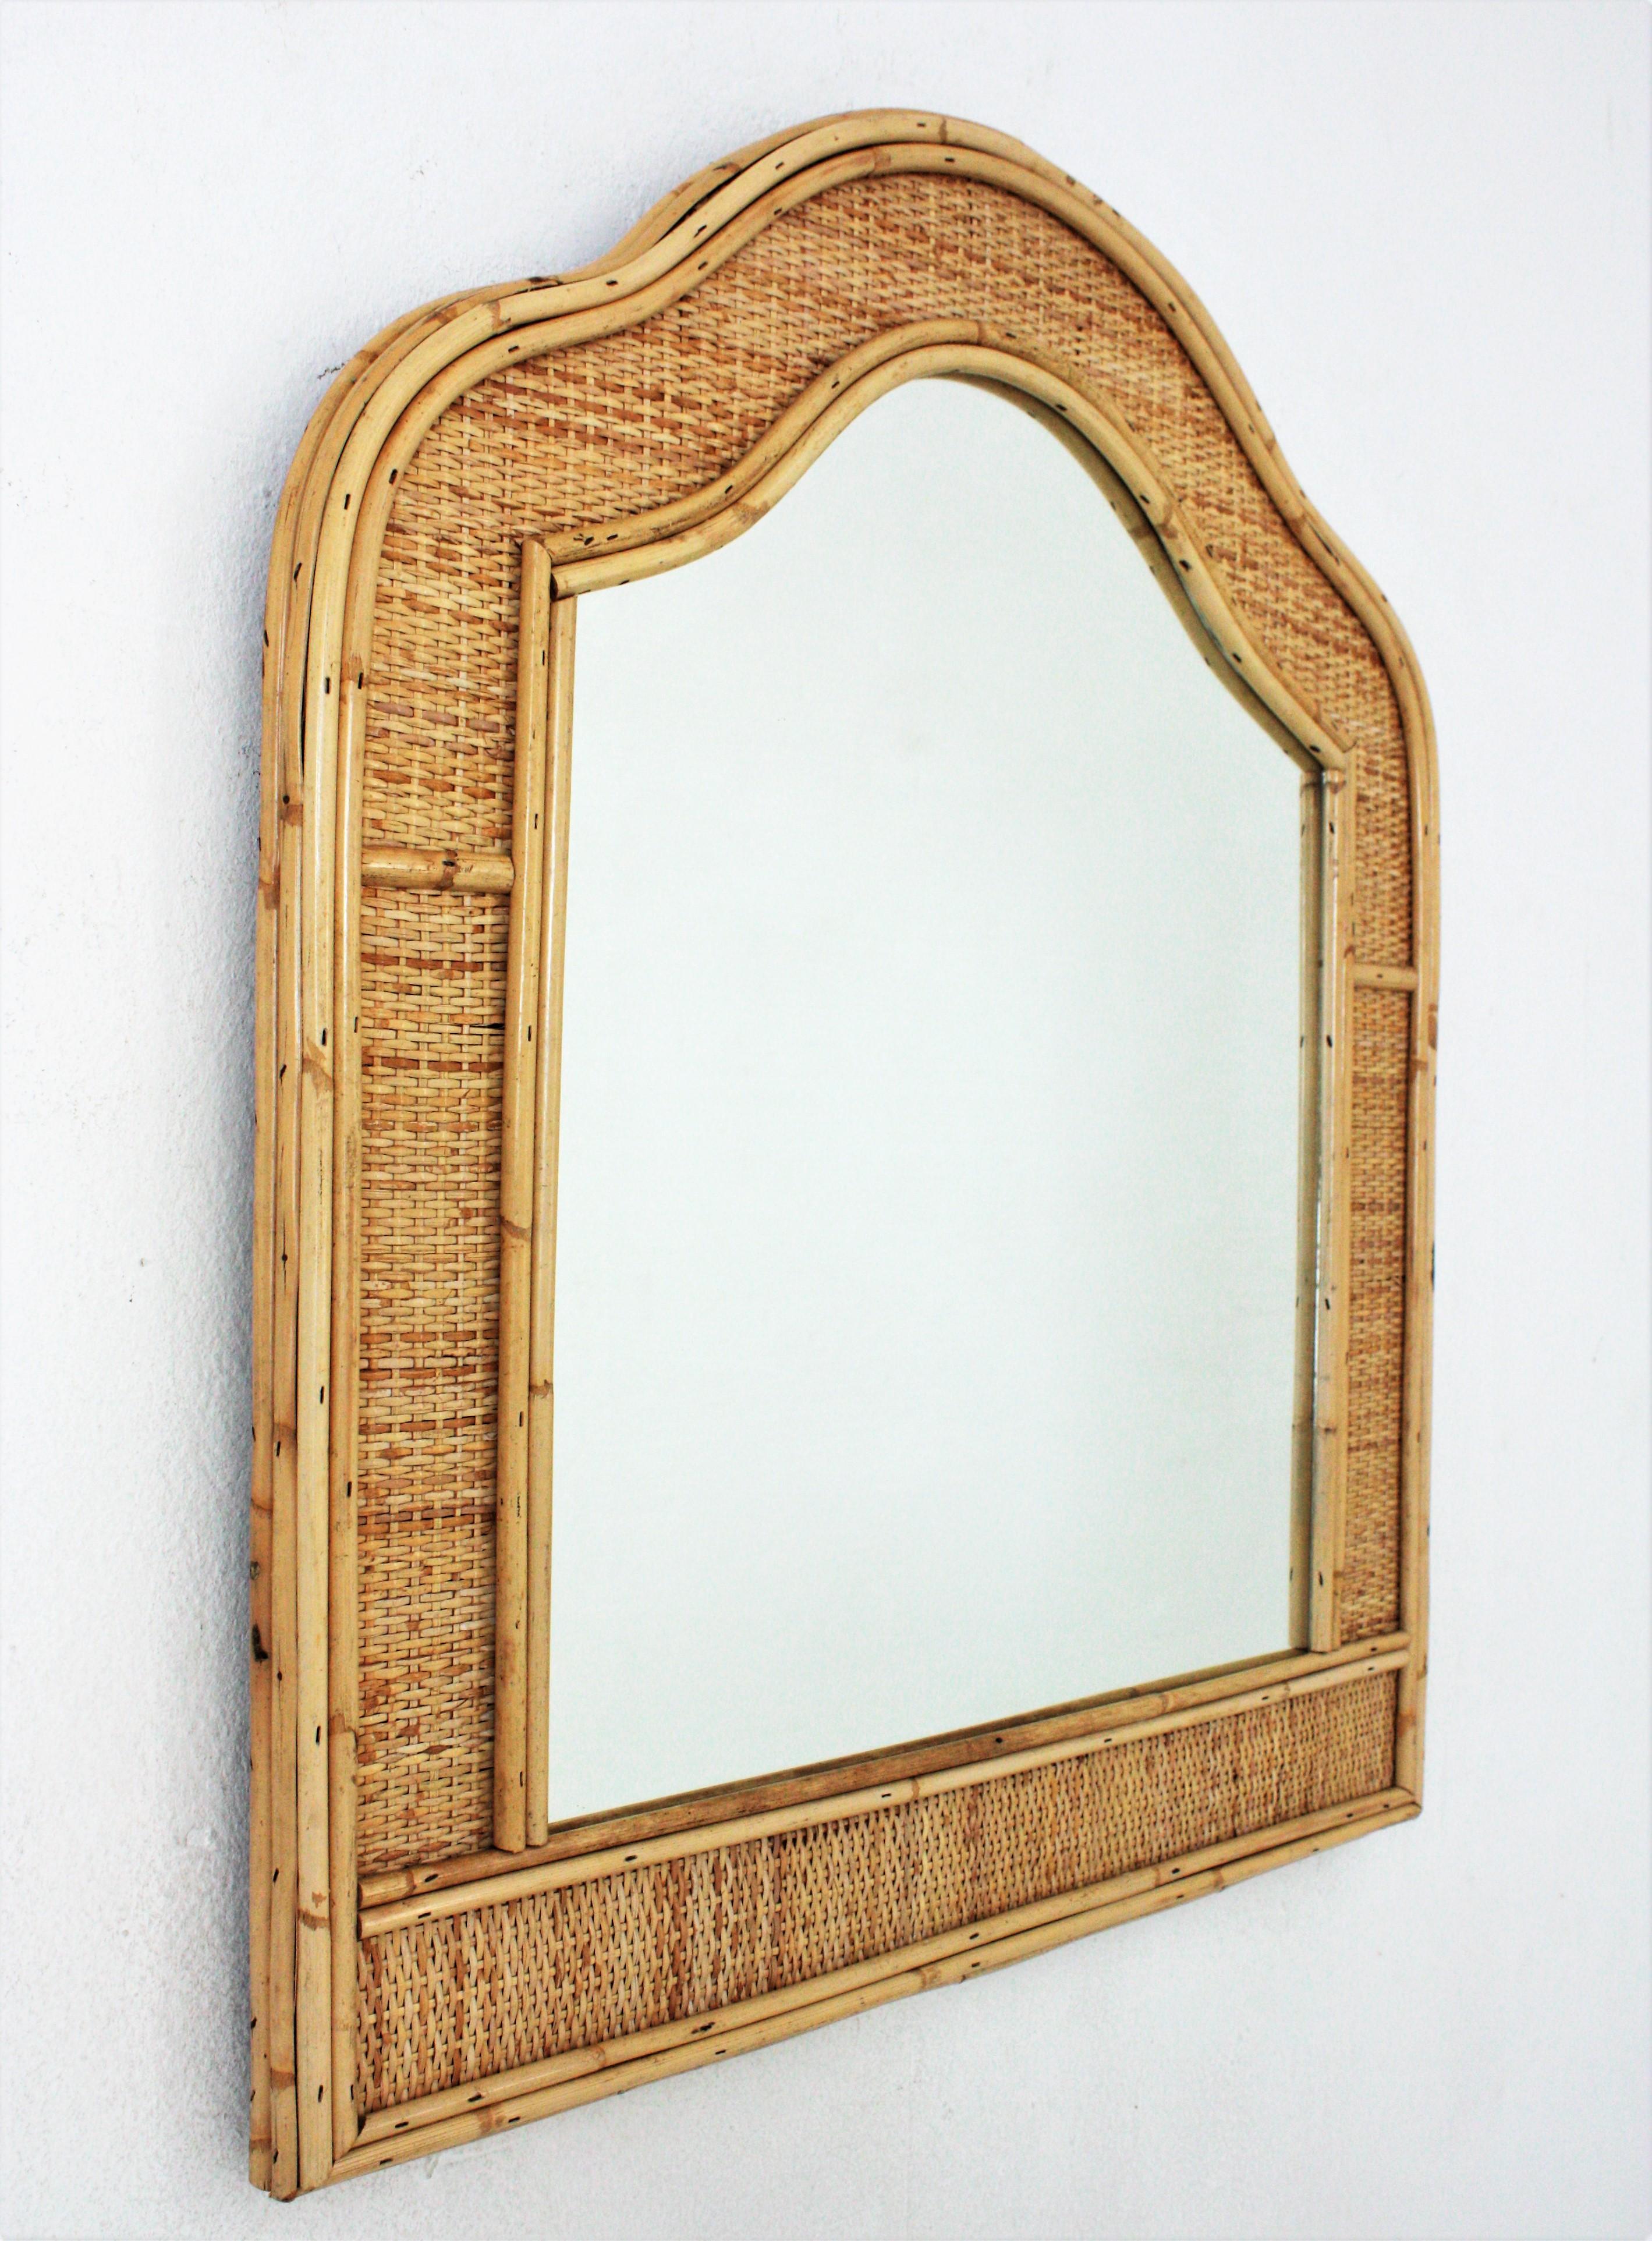 20th Century French Coastal Arched Mirror in Rattan and Woven Wicker